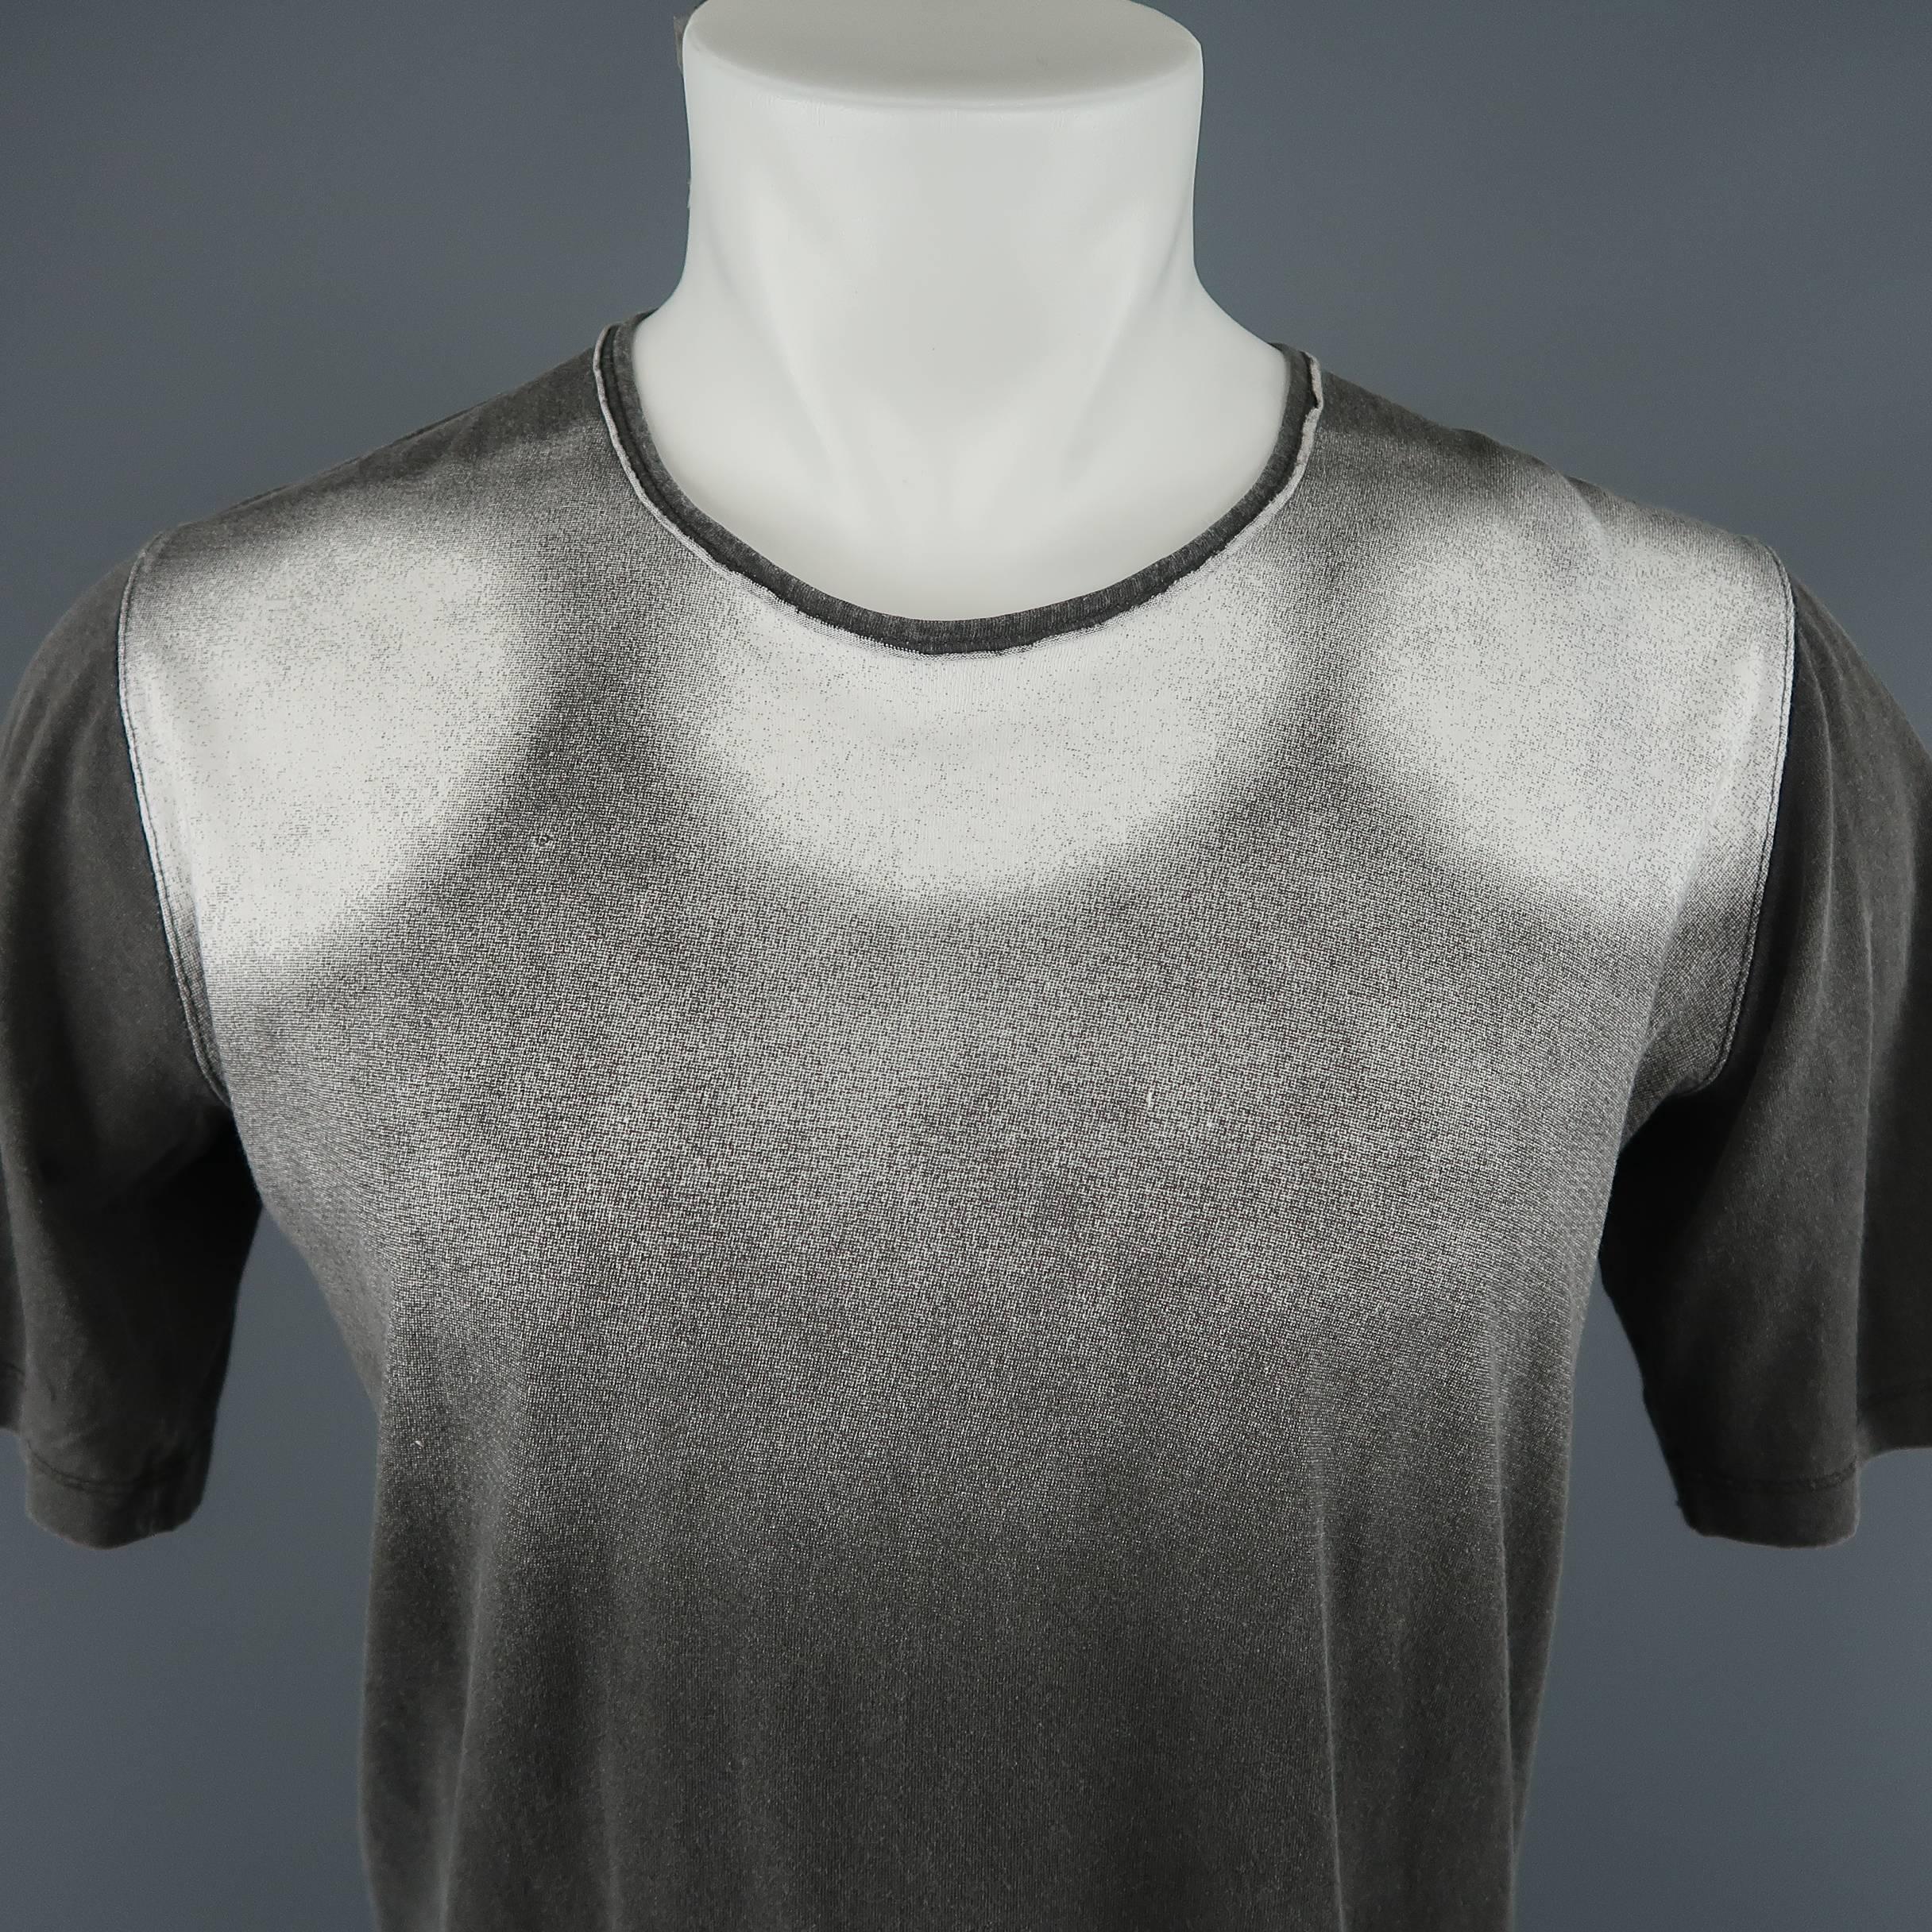 DRKSHDW by Rick Owens tee shirt comes in gray ombre graphic cotton jersey with light Heather gray liner.
 
Good Pre-Owned Condition.
Marked: (no size)
 
Measurements:
 
Shoulder: 17 in.
Chest: 42 in.
Sleeve: 10 in.
Length: 31 in.
